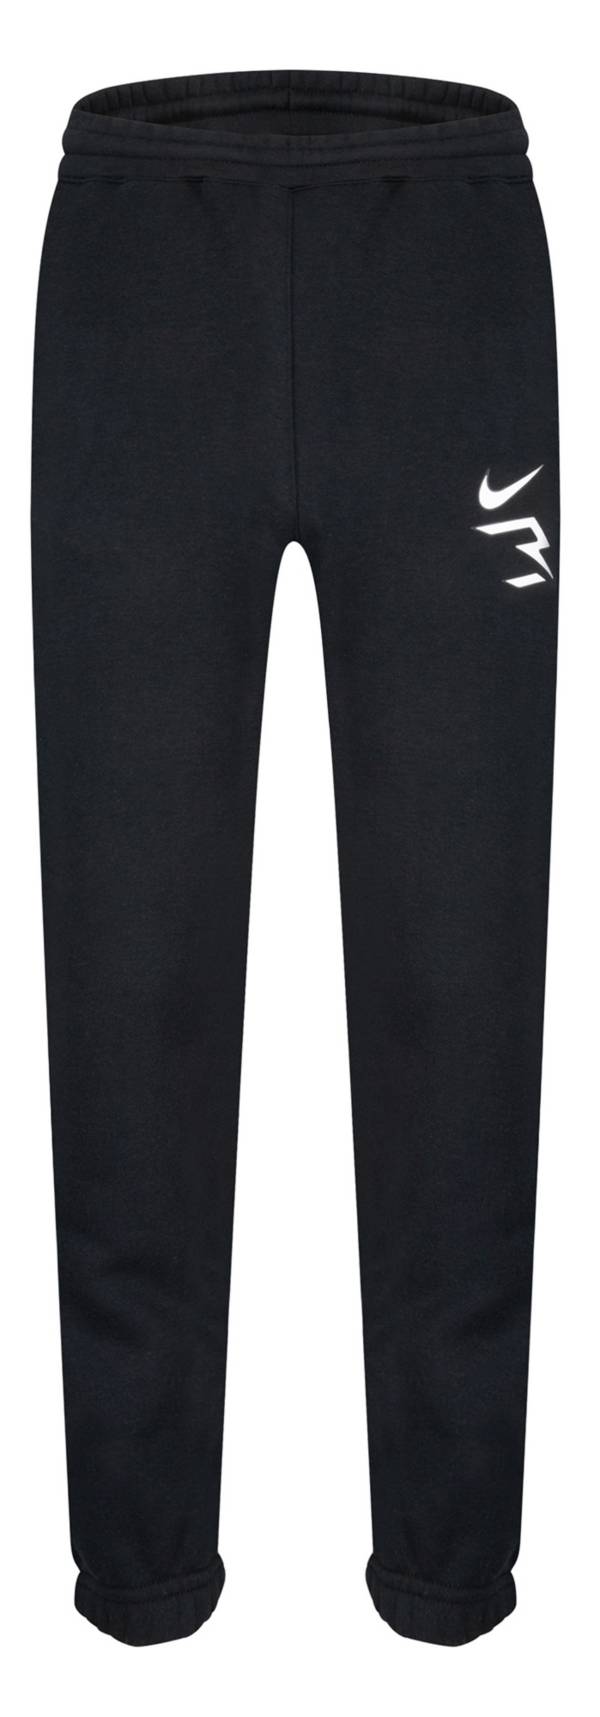 Nike 3BRAND by Russell Wilson Boys' Joggers product image